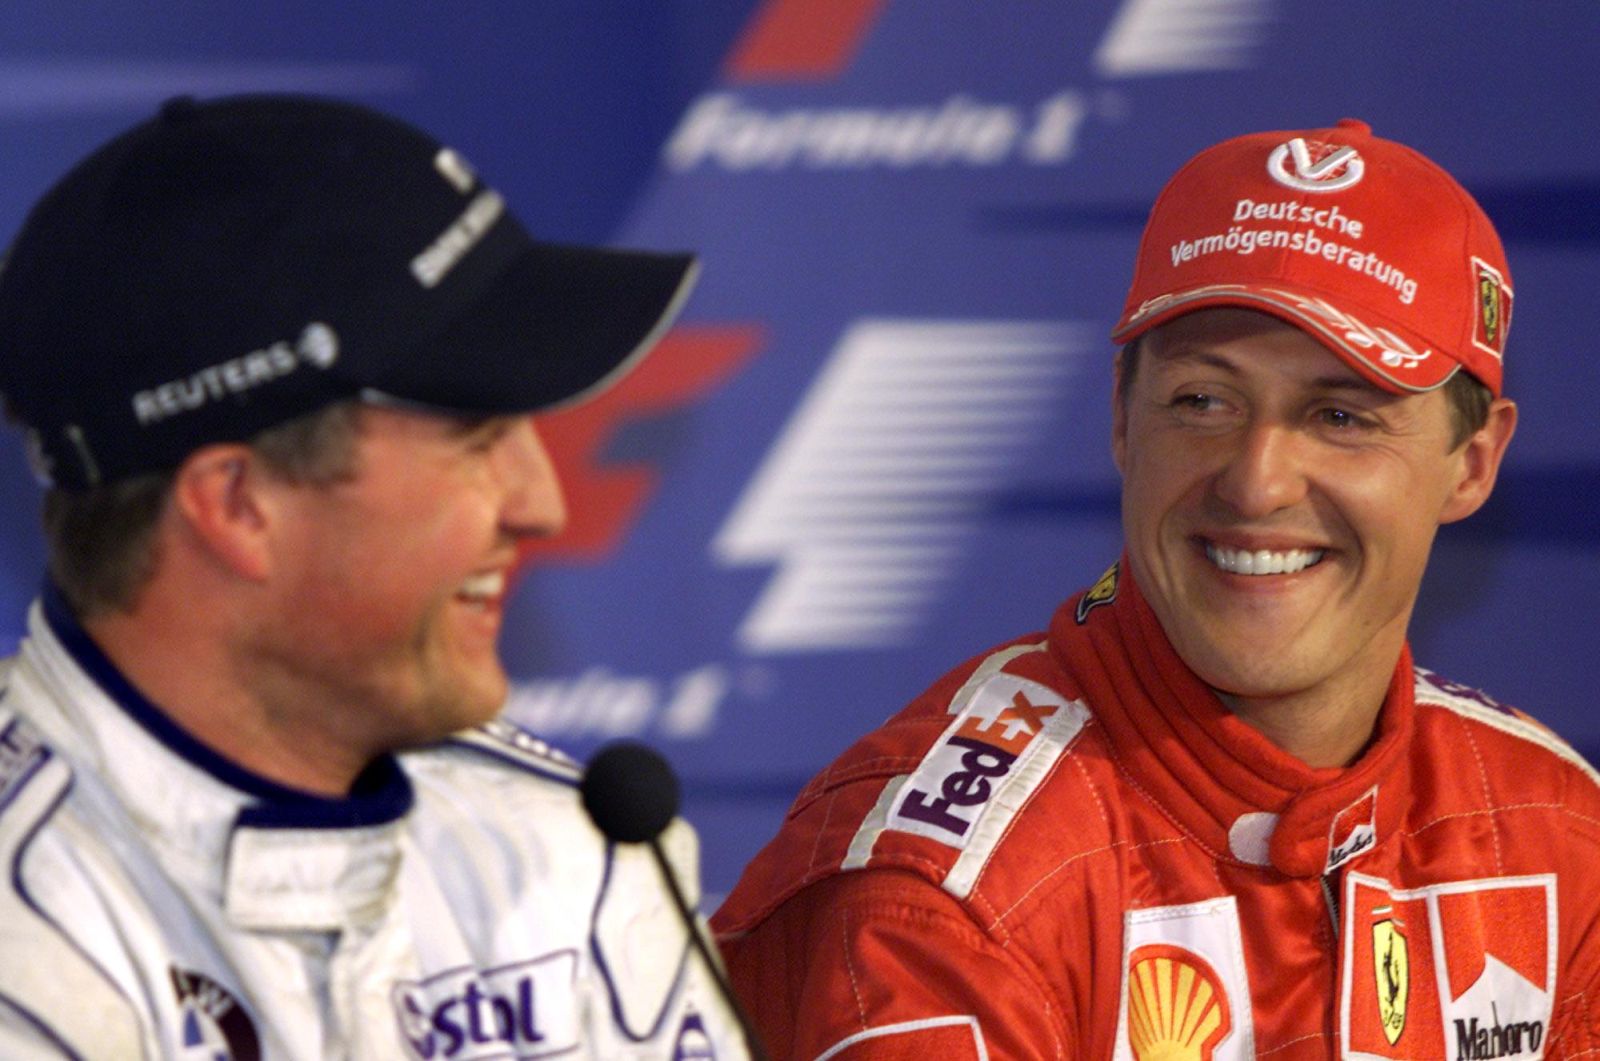 Ferrari's Michael Schumacher, right, of Germany, shares a laugh with his brother Ralf during a news conference following the qualifying session at the Canadian Grand Prix Saturday June 9, 2001, in Montreal. Micheal took the pole position while Ralf will start second for the Sunday race. (AP Photo/Kevin Frayer)